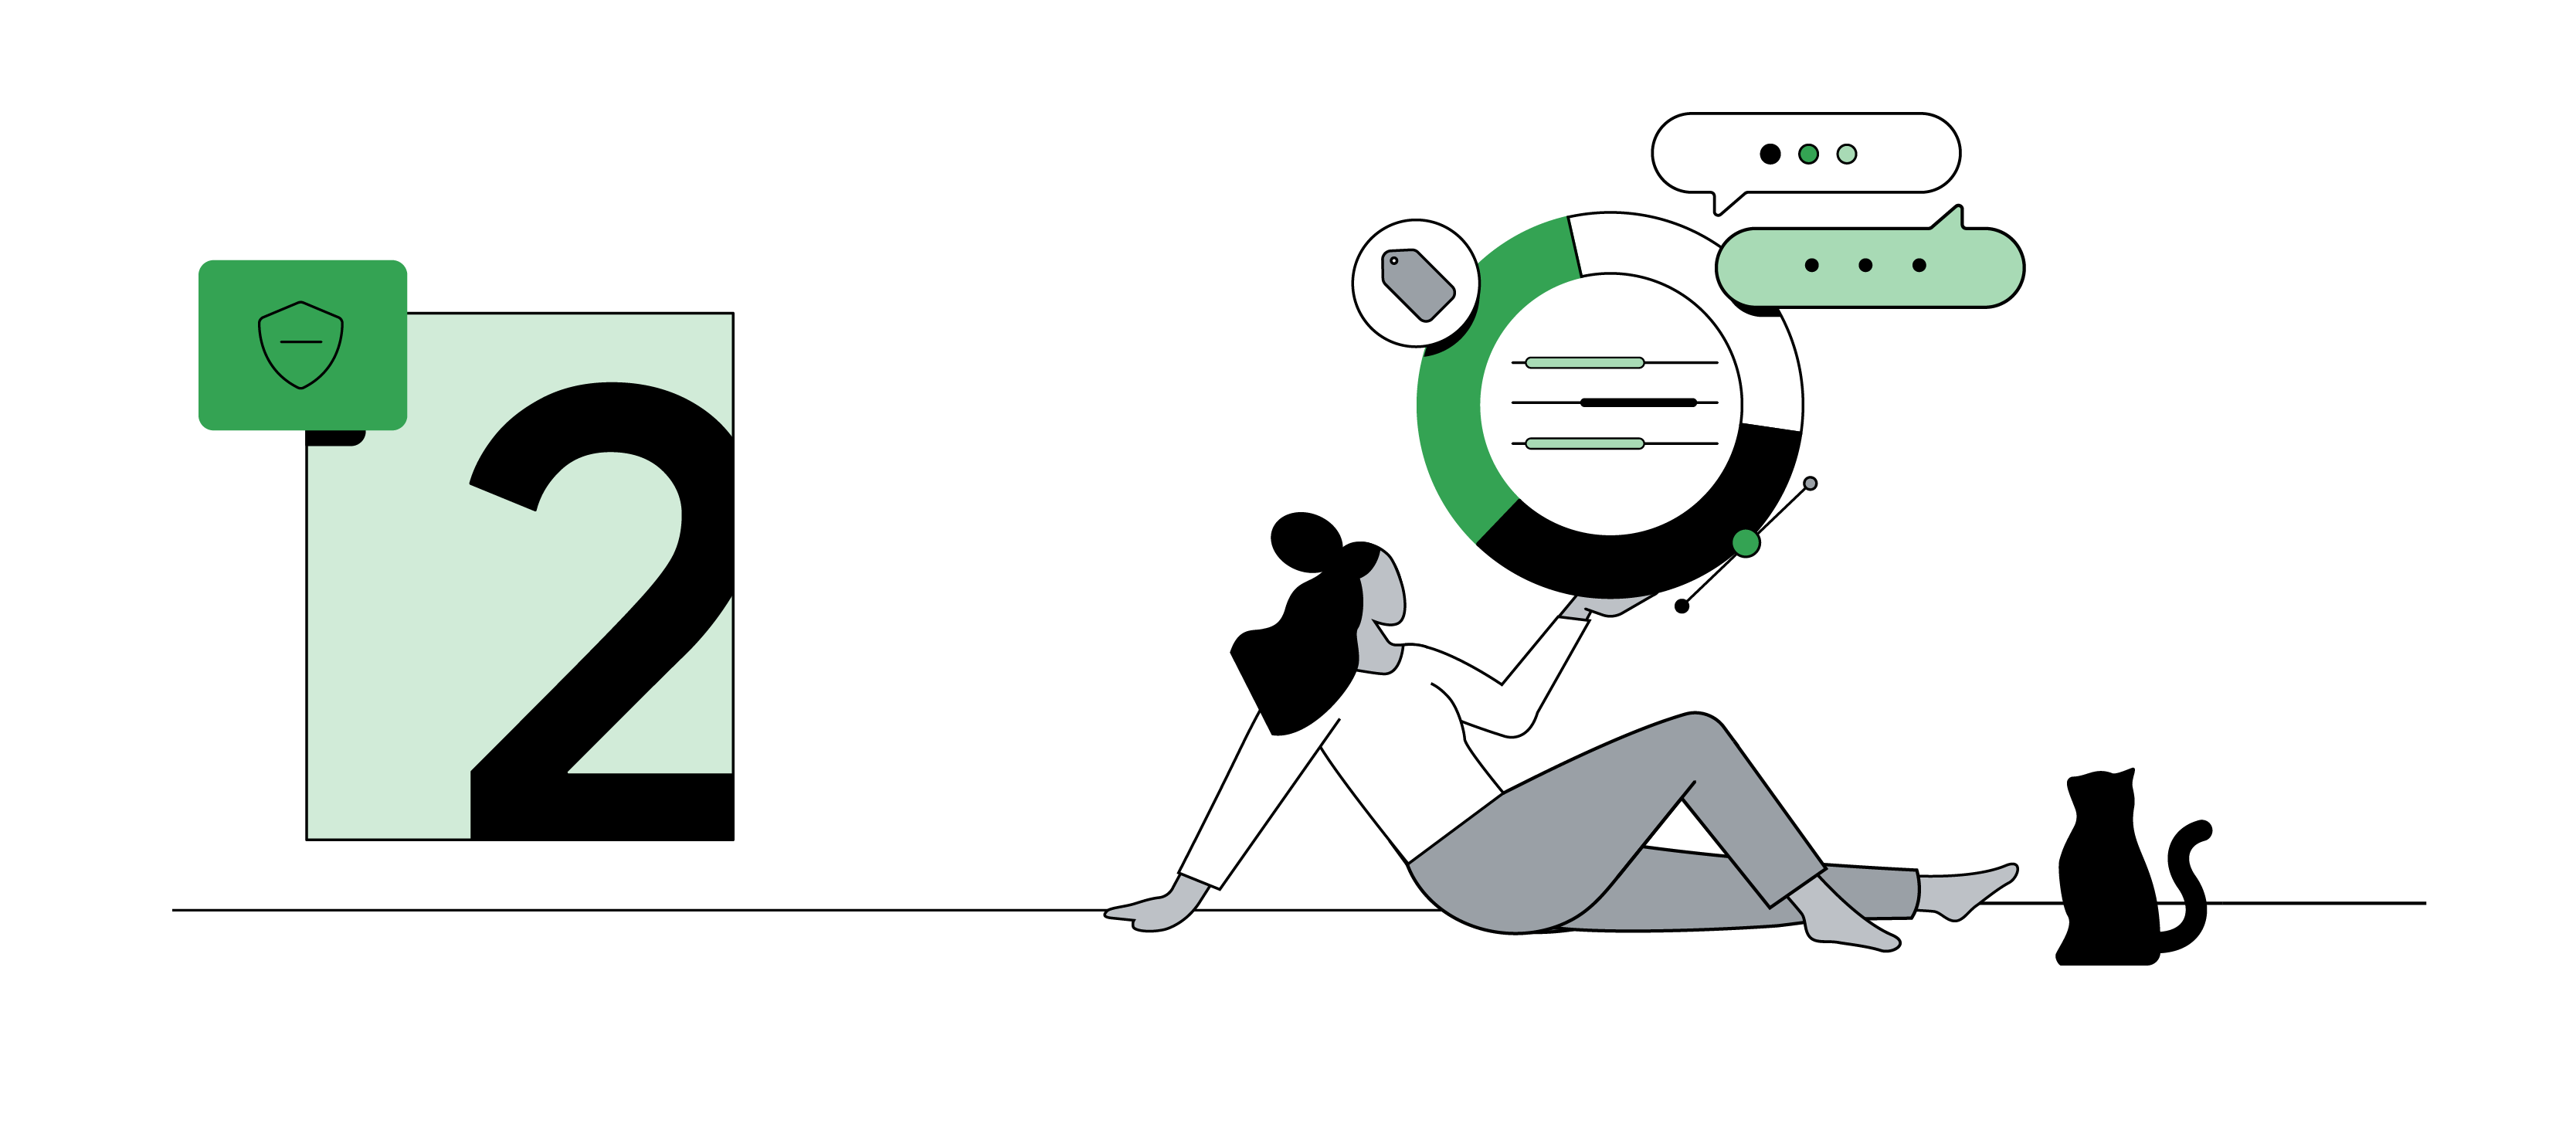 2. A person with long black hair and dark skin, wearing a white shirt and gray pants, lounges on the floor next to a black cat, while a circle graph measures online interactions, like shopping and messaging.